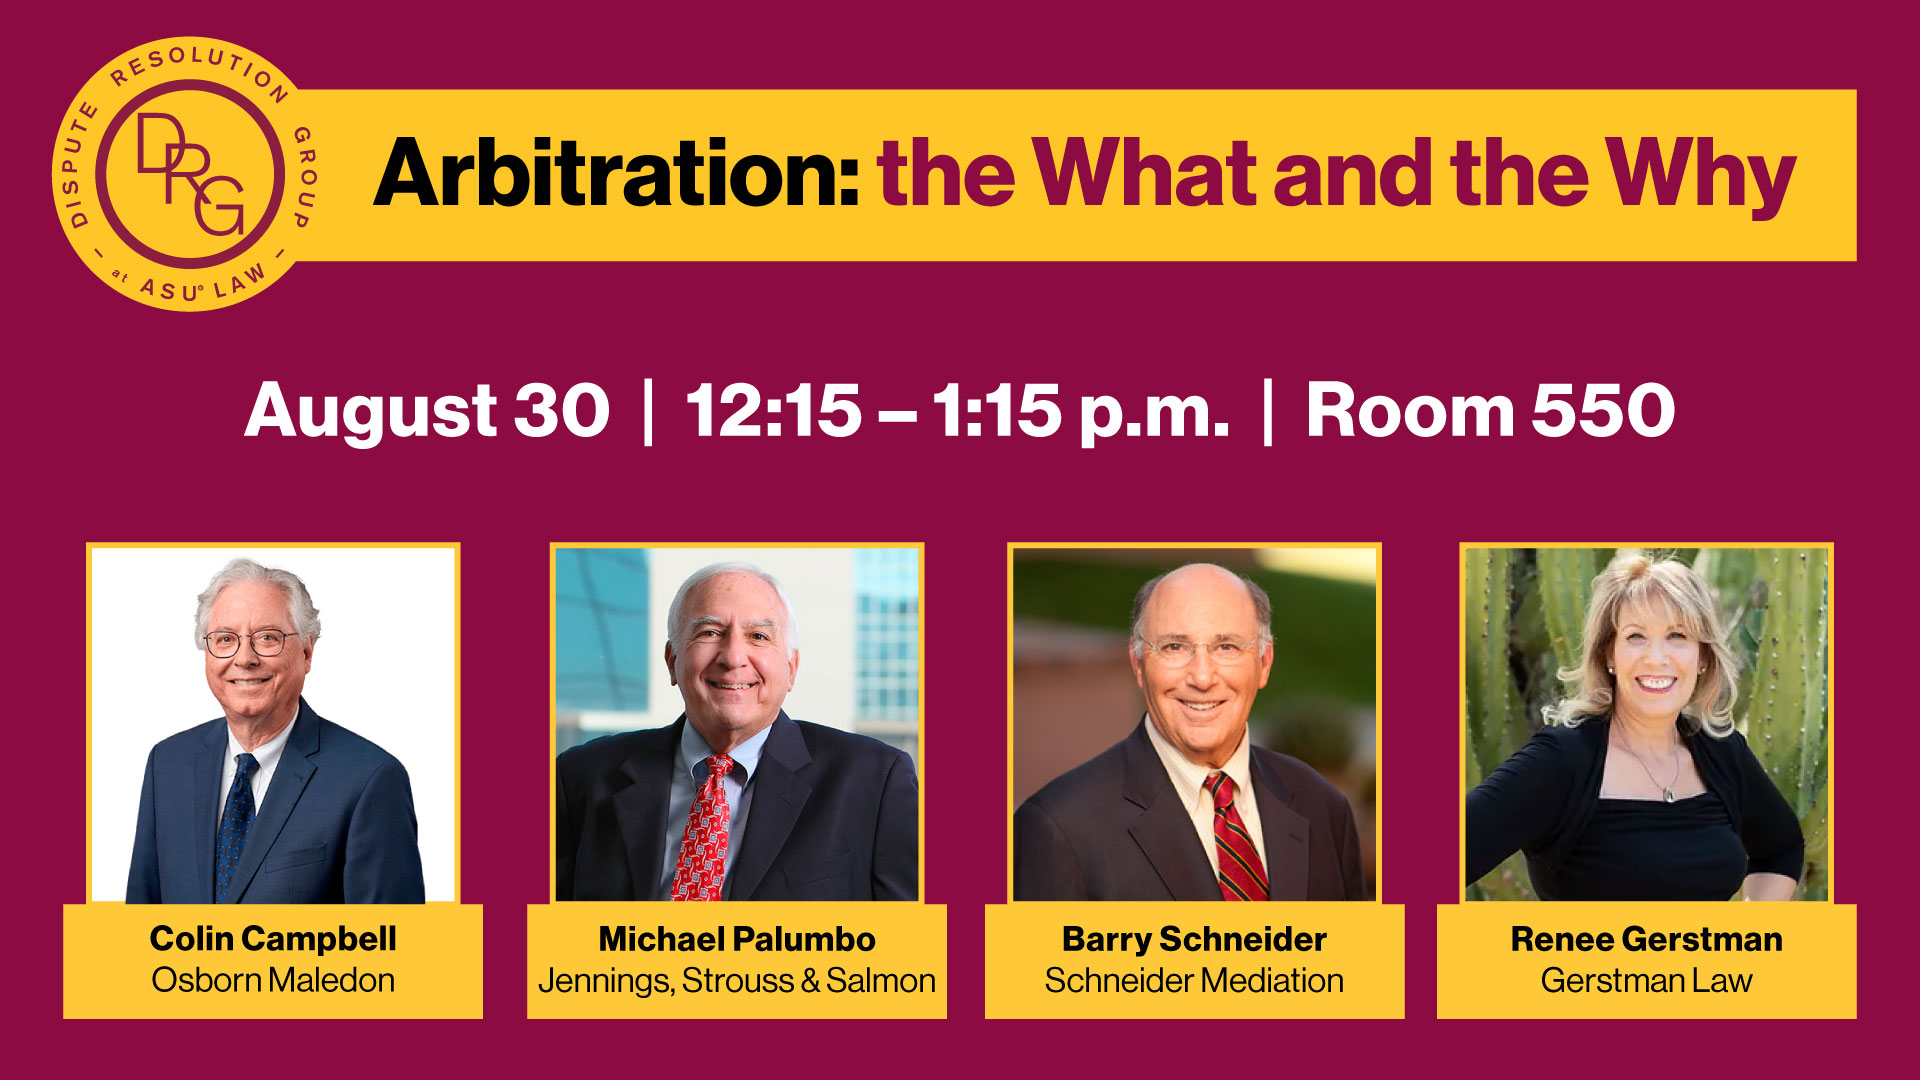 Arbitration, the What and the Why